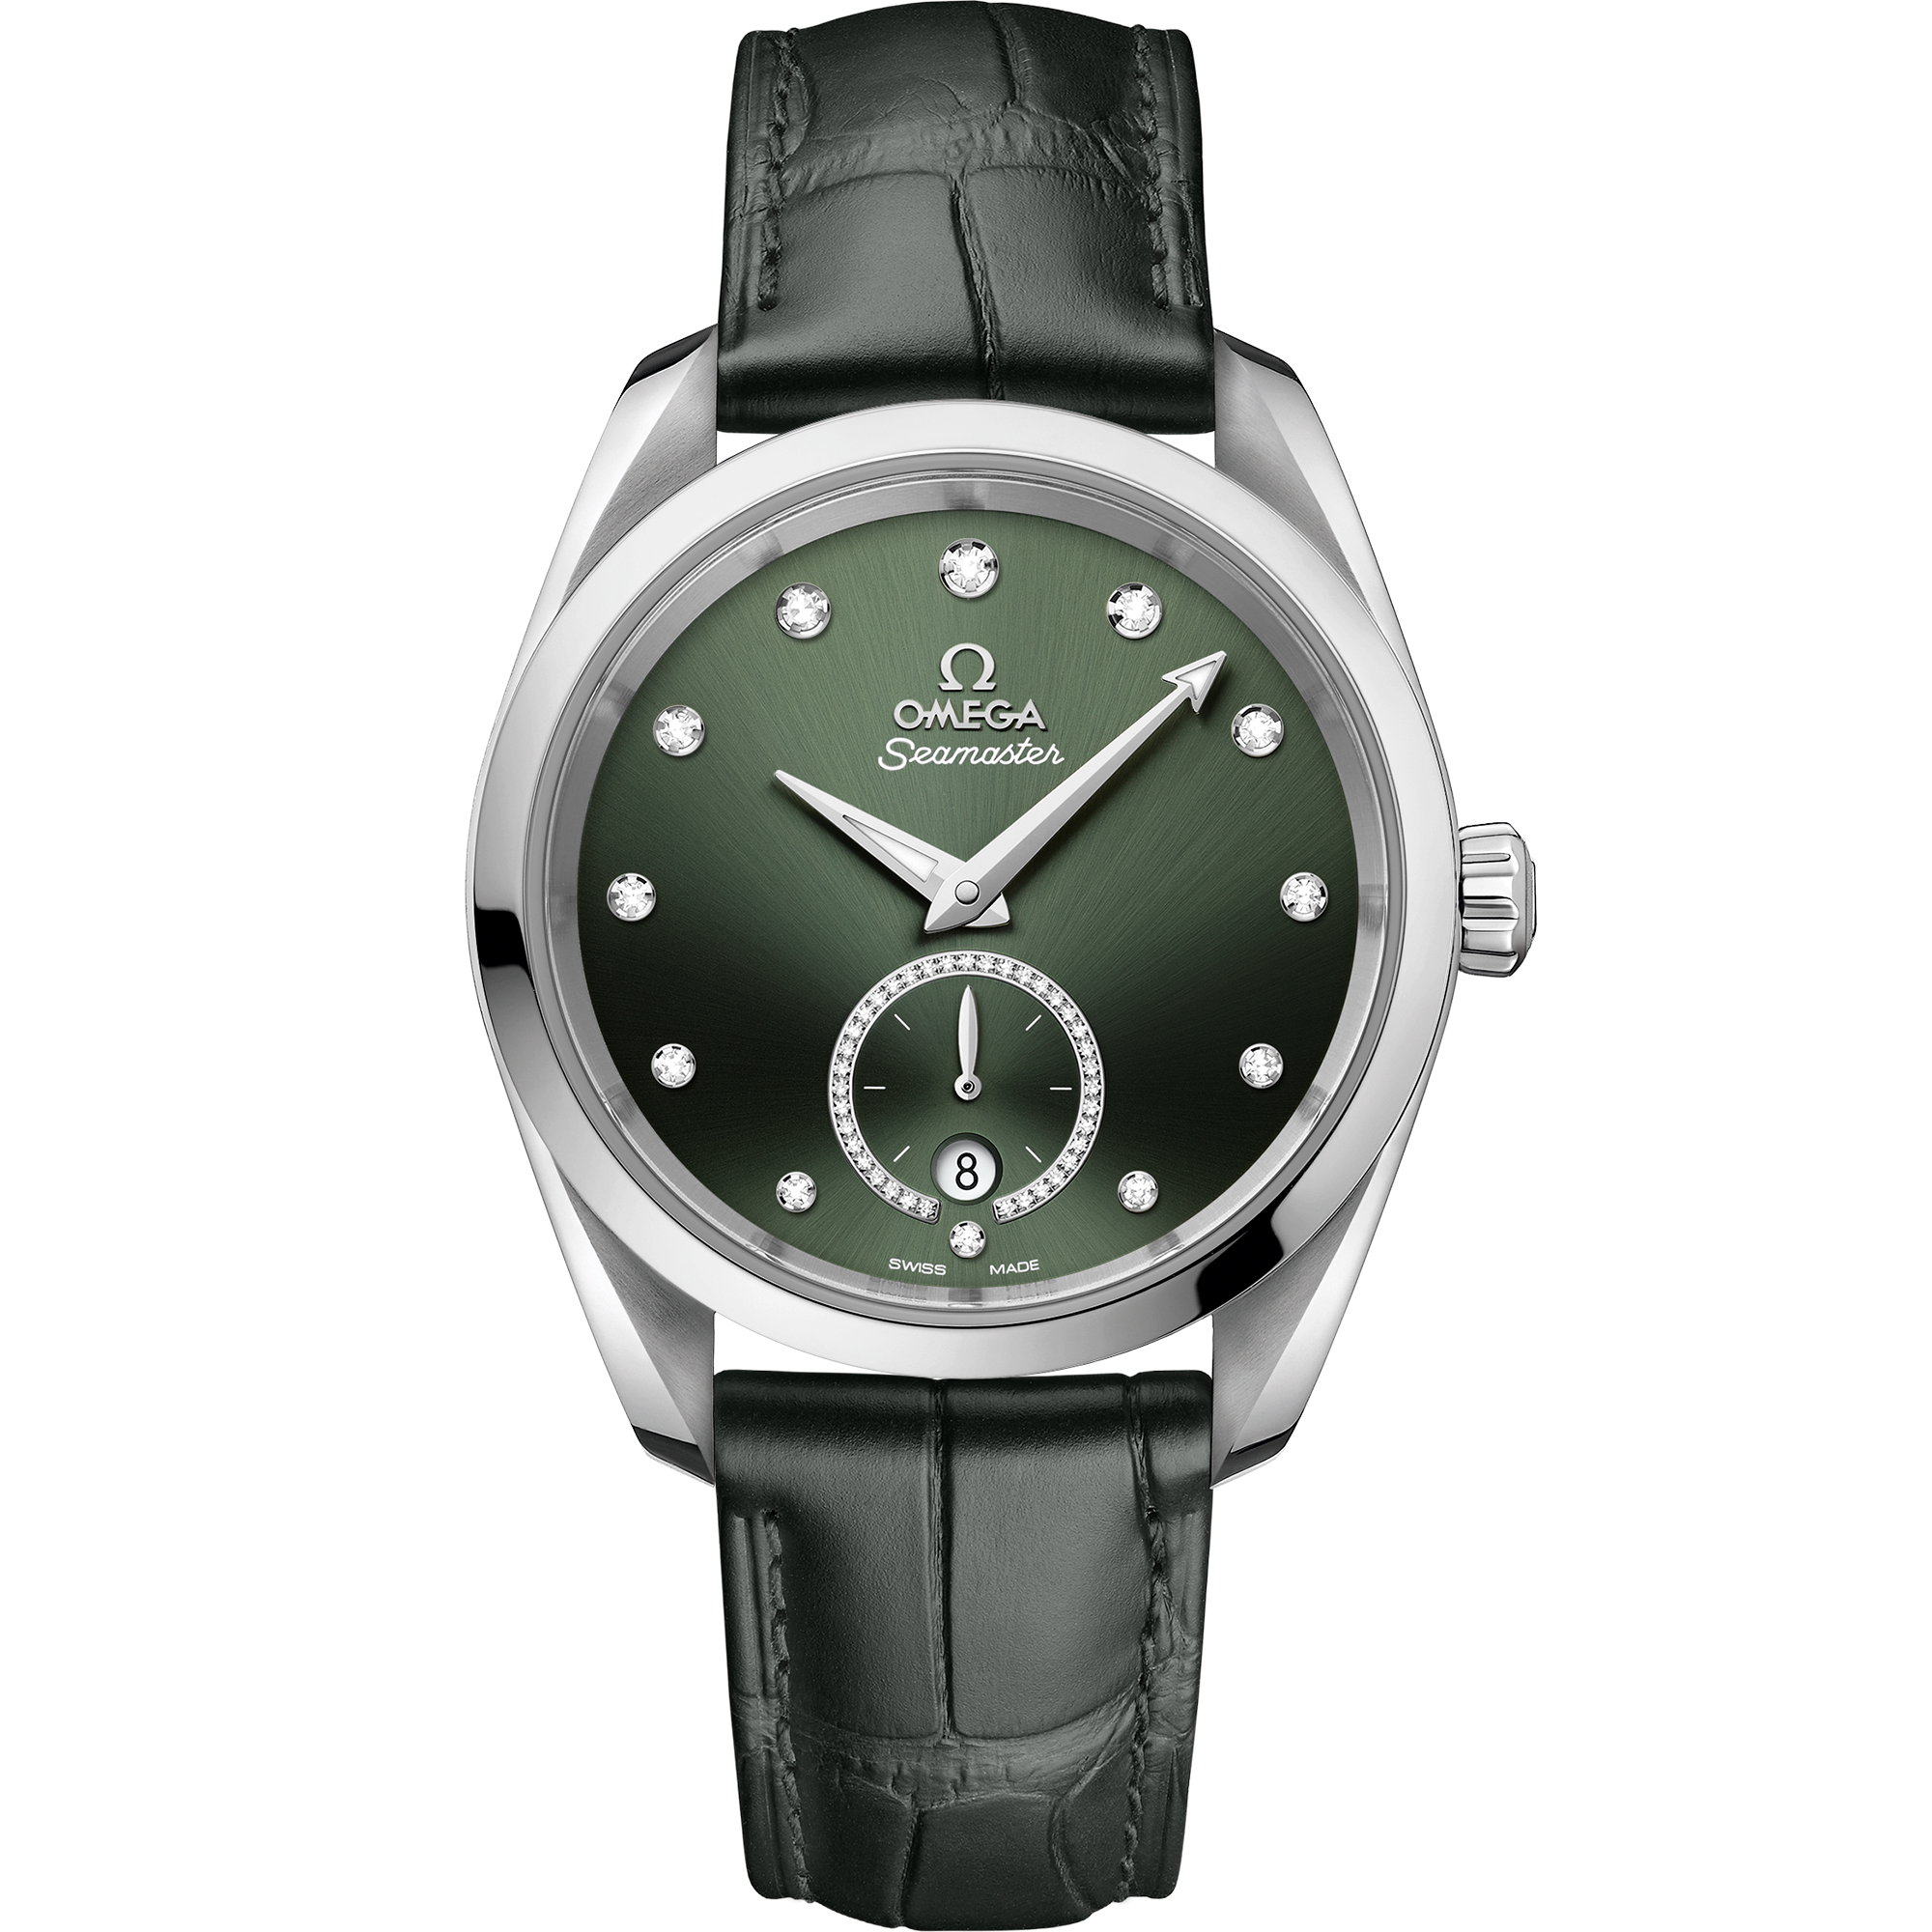 Seamaster 38 mm, steel on leather strap - 220.13.38.20.60.001